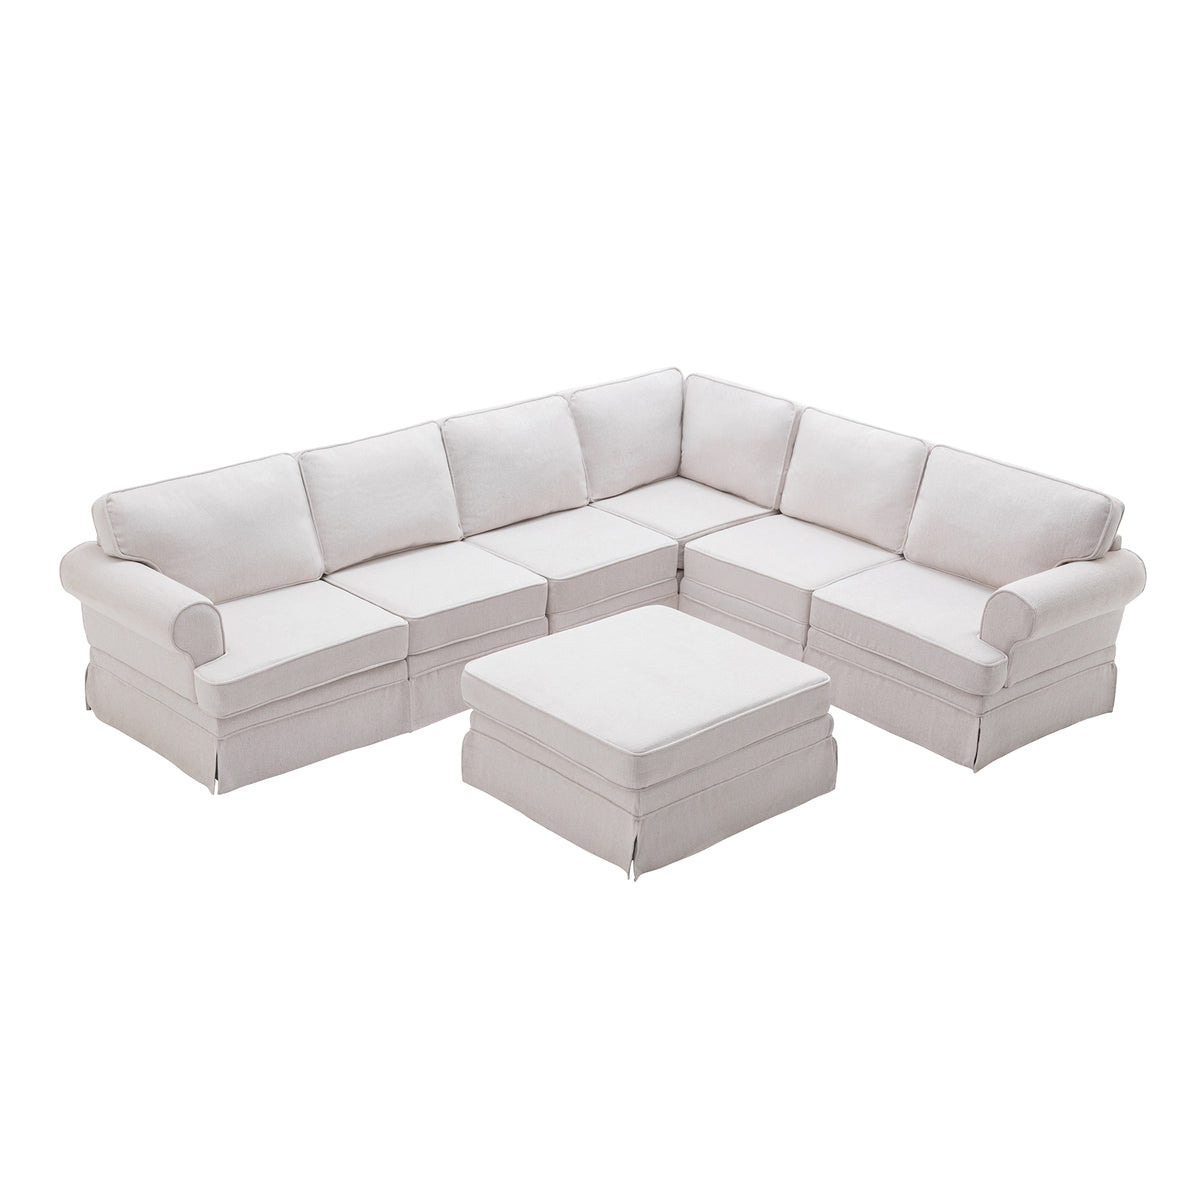 109.4" Fabric Upholstered Modular Sofa Collection, Sectional Couch with removable Ottoman  - Light Beige